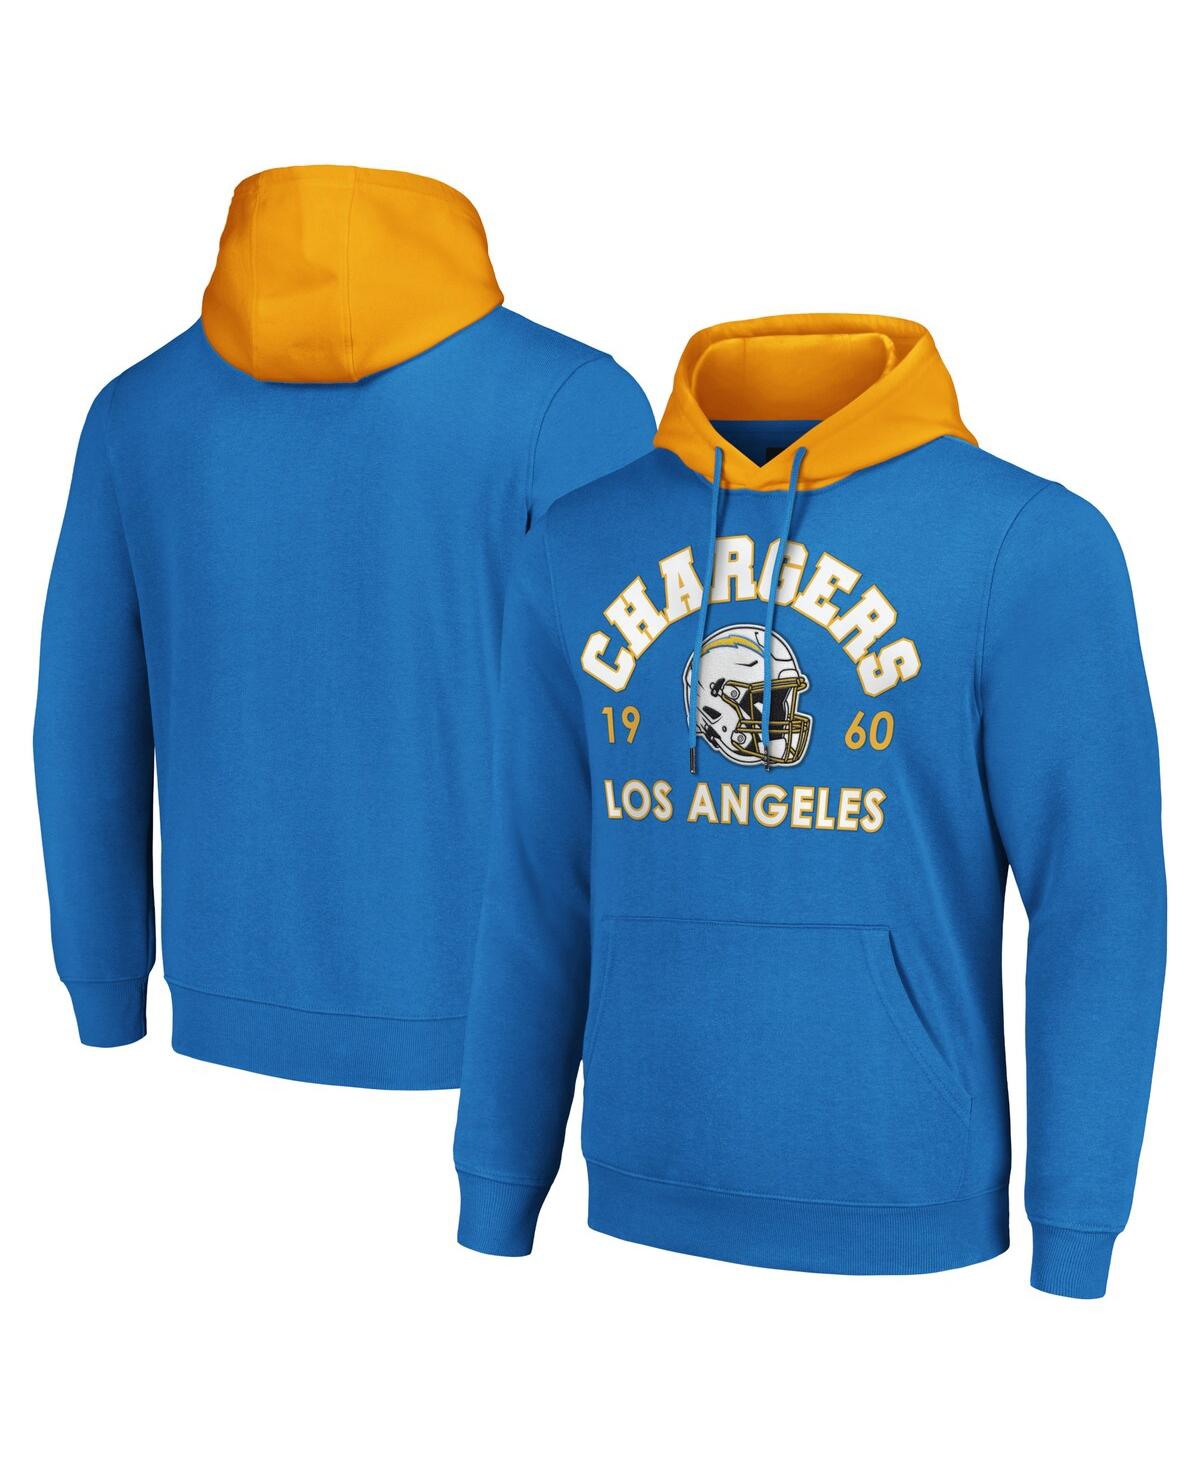 Men's G-iii Sports by Carl Banks Powder Blue Los Angeles Chargers Colorblock Pullover Hoodie - Powder Blue